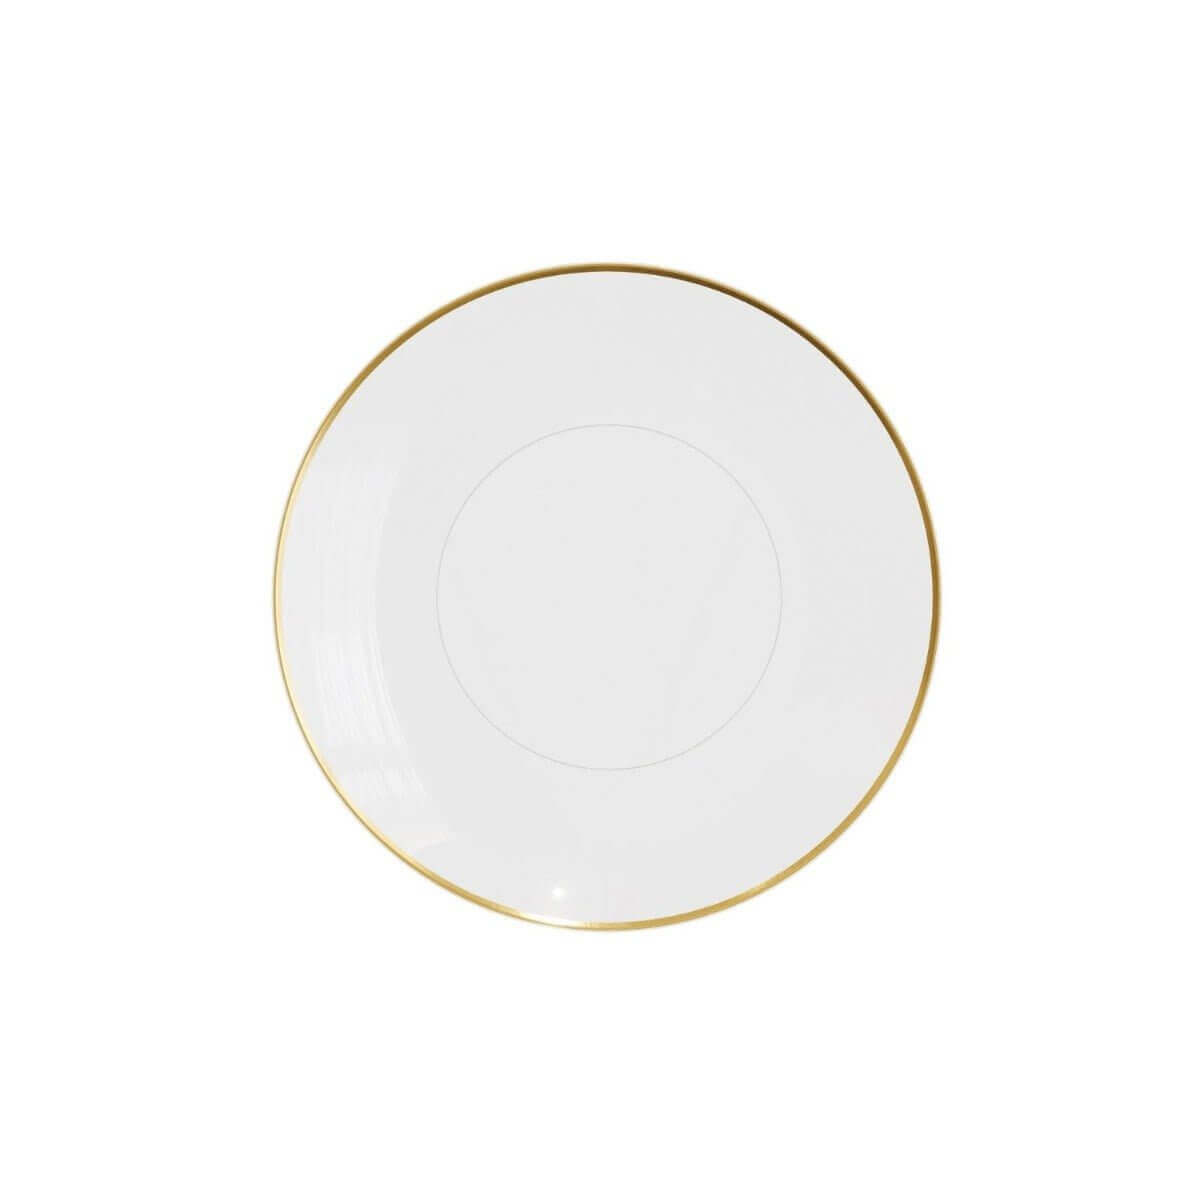 6" Clear With Gold Rim Plastic Plates (120 Count) - Yom Tov Settings